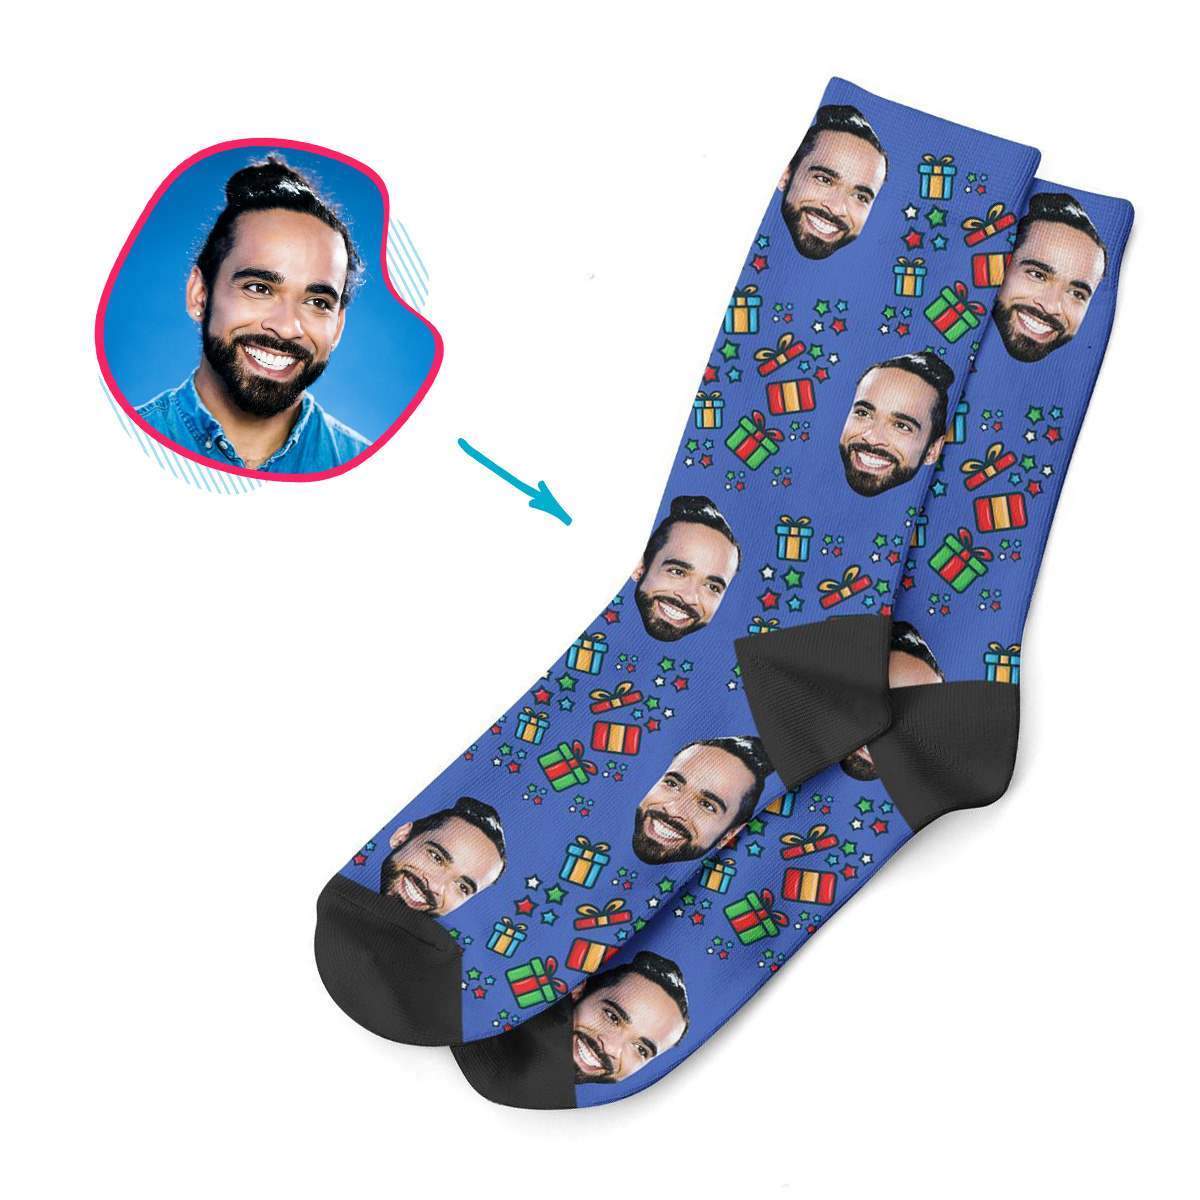 darkblue Gift Box socks personalized with photo of face printed on them